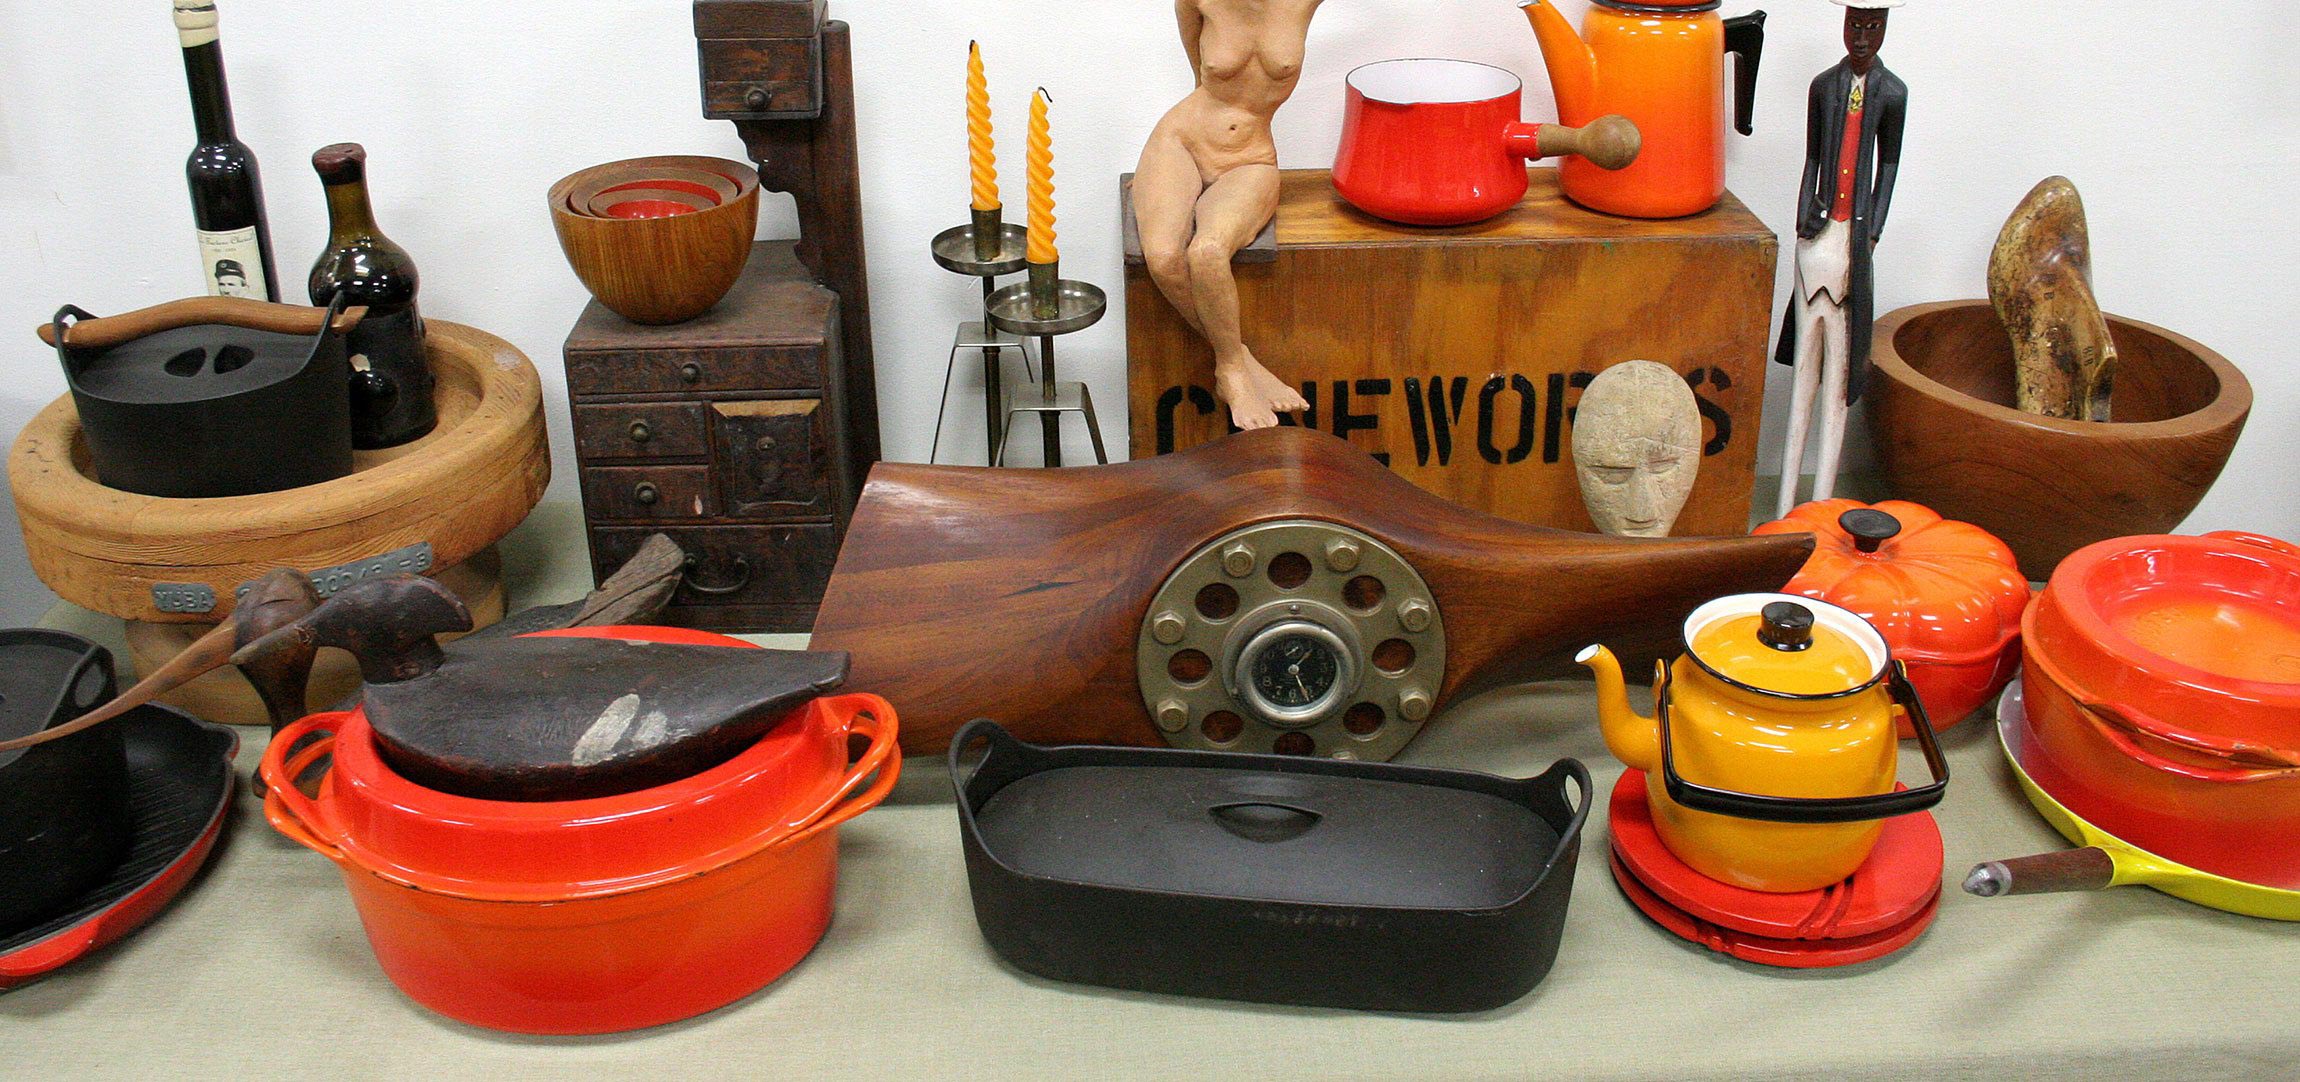 antiques and vintage items on a table